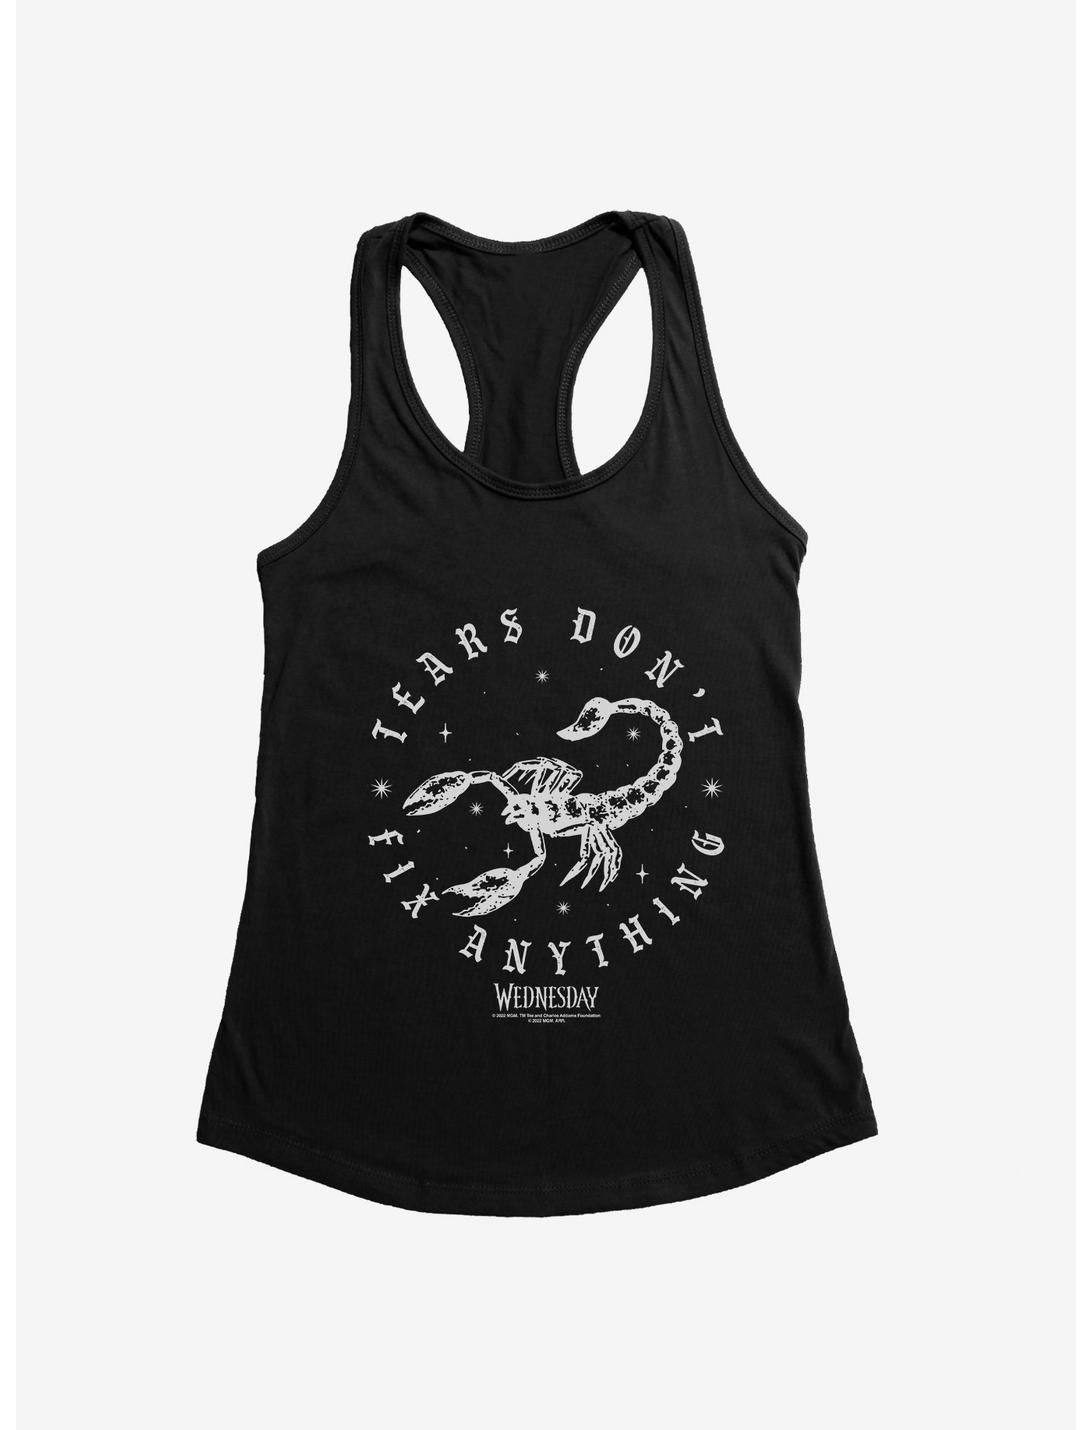 Wednesday Tears Don't Fix Anything Womens Tank Top, BLACK, hi-res